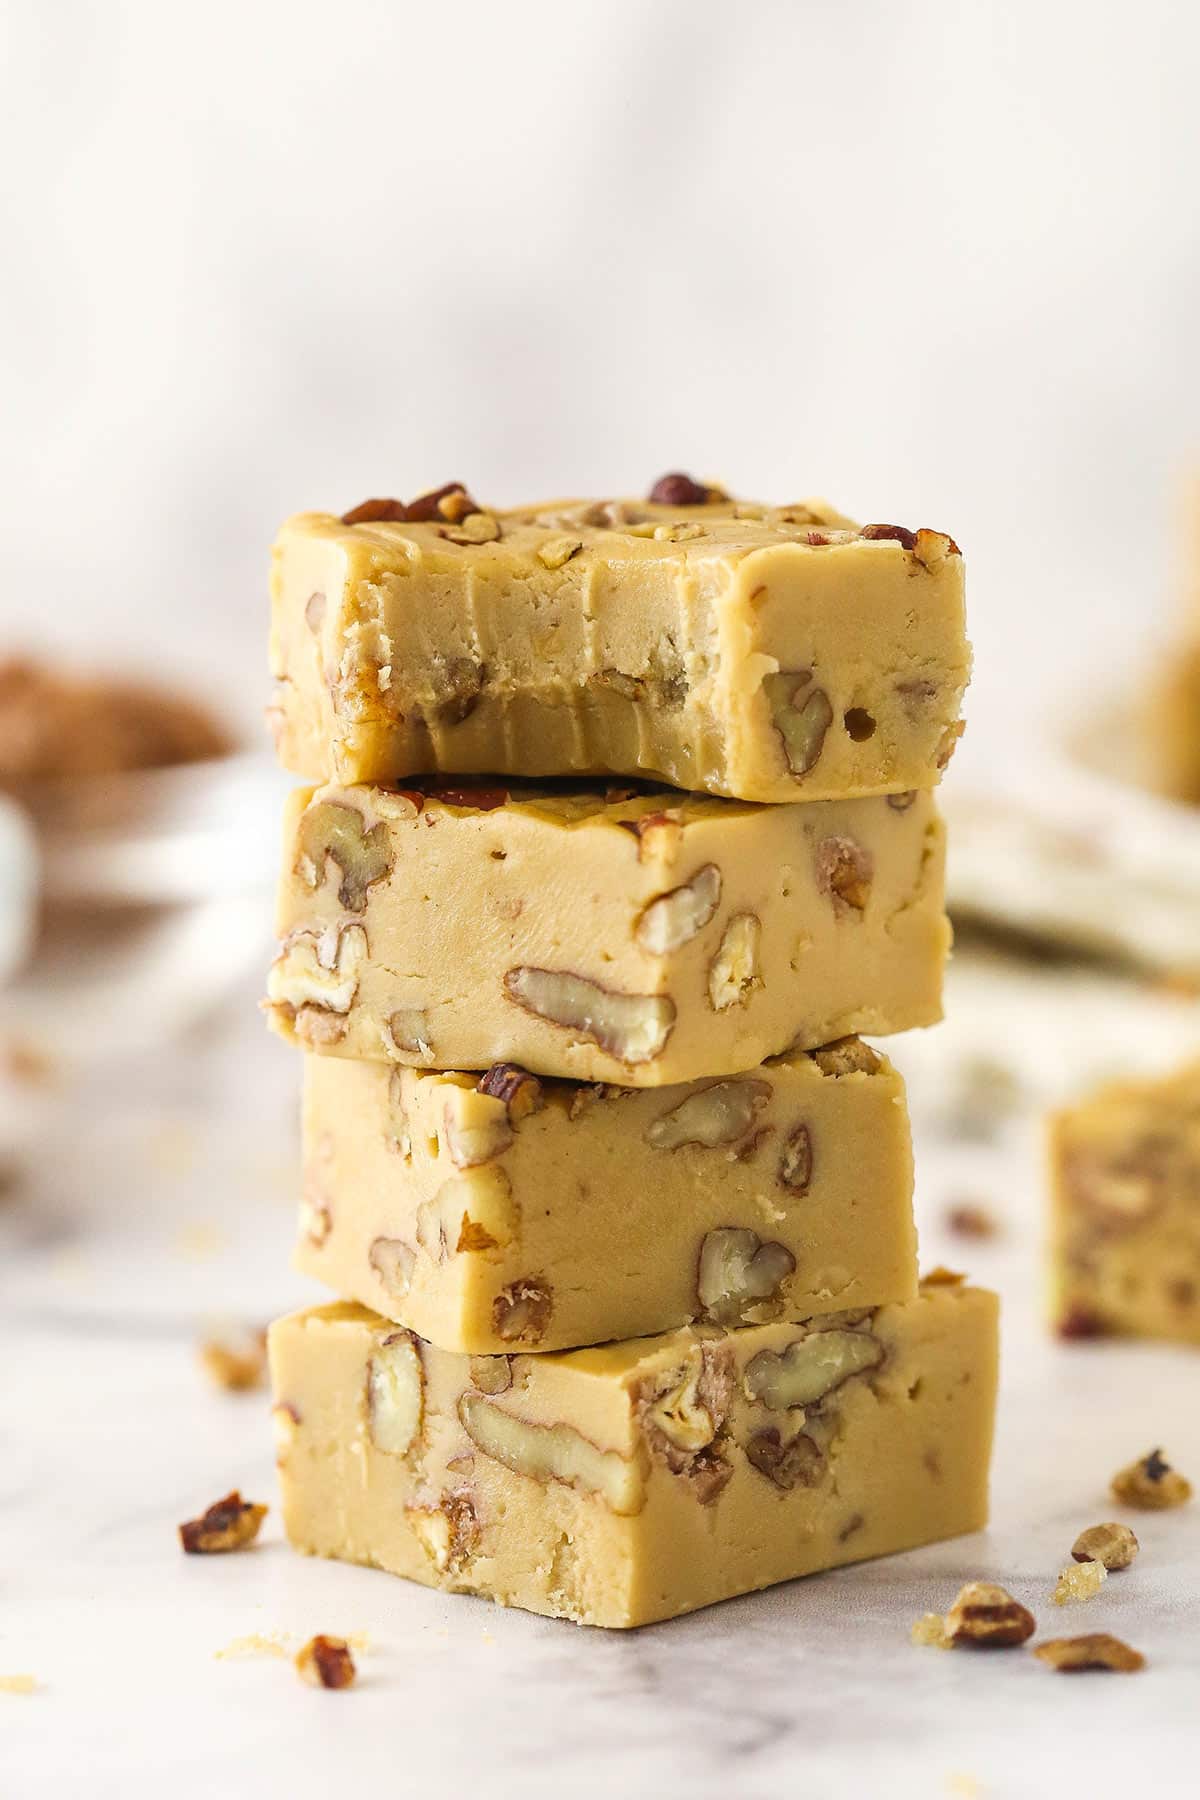 4 pieces of Praline Pecan Fudge stacked one on top of the other with a bite removed from the top piece.